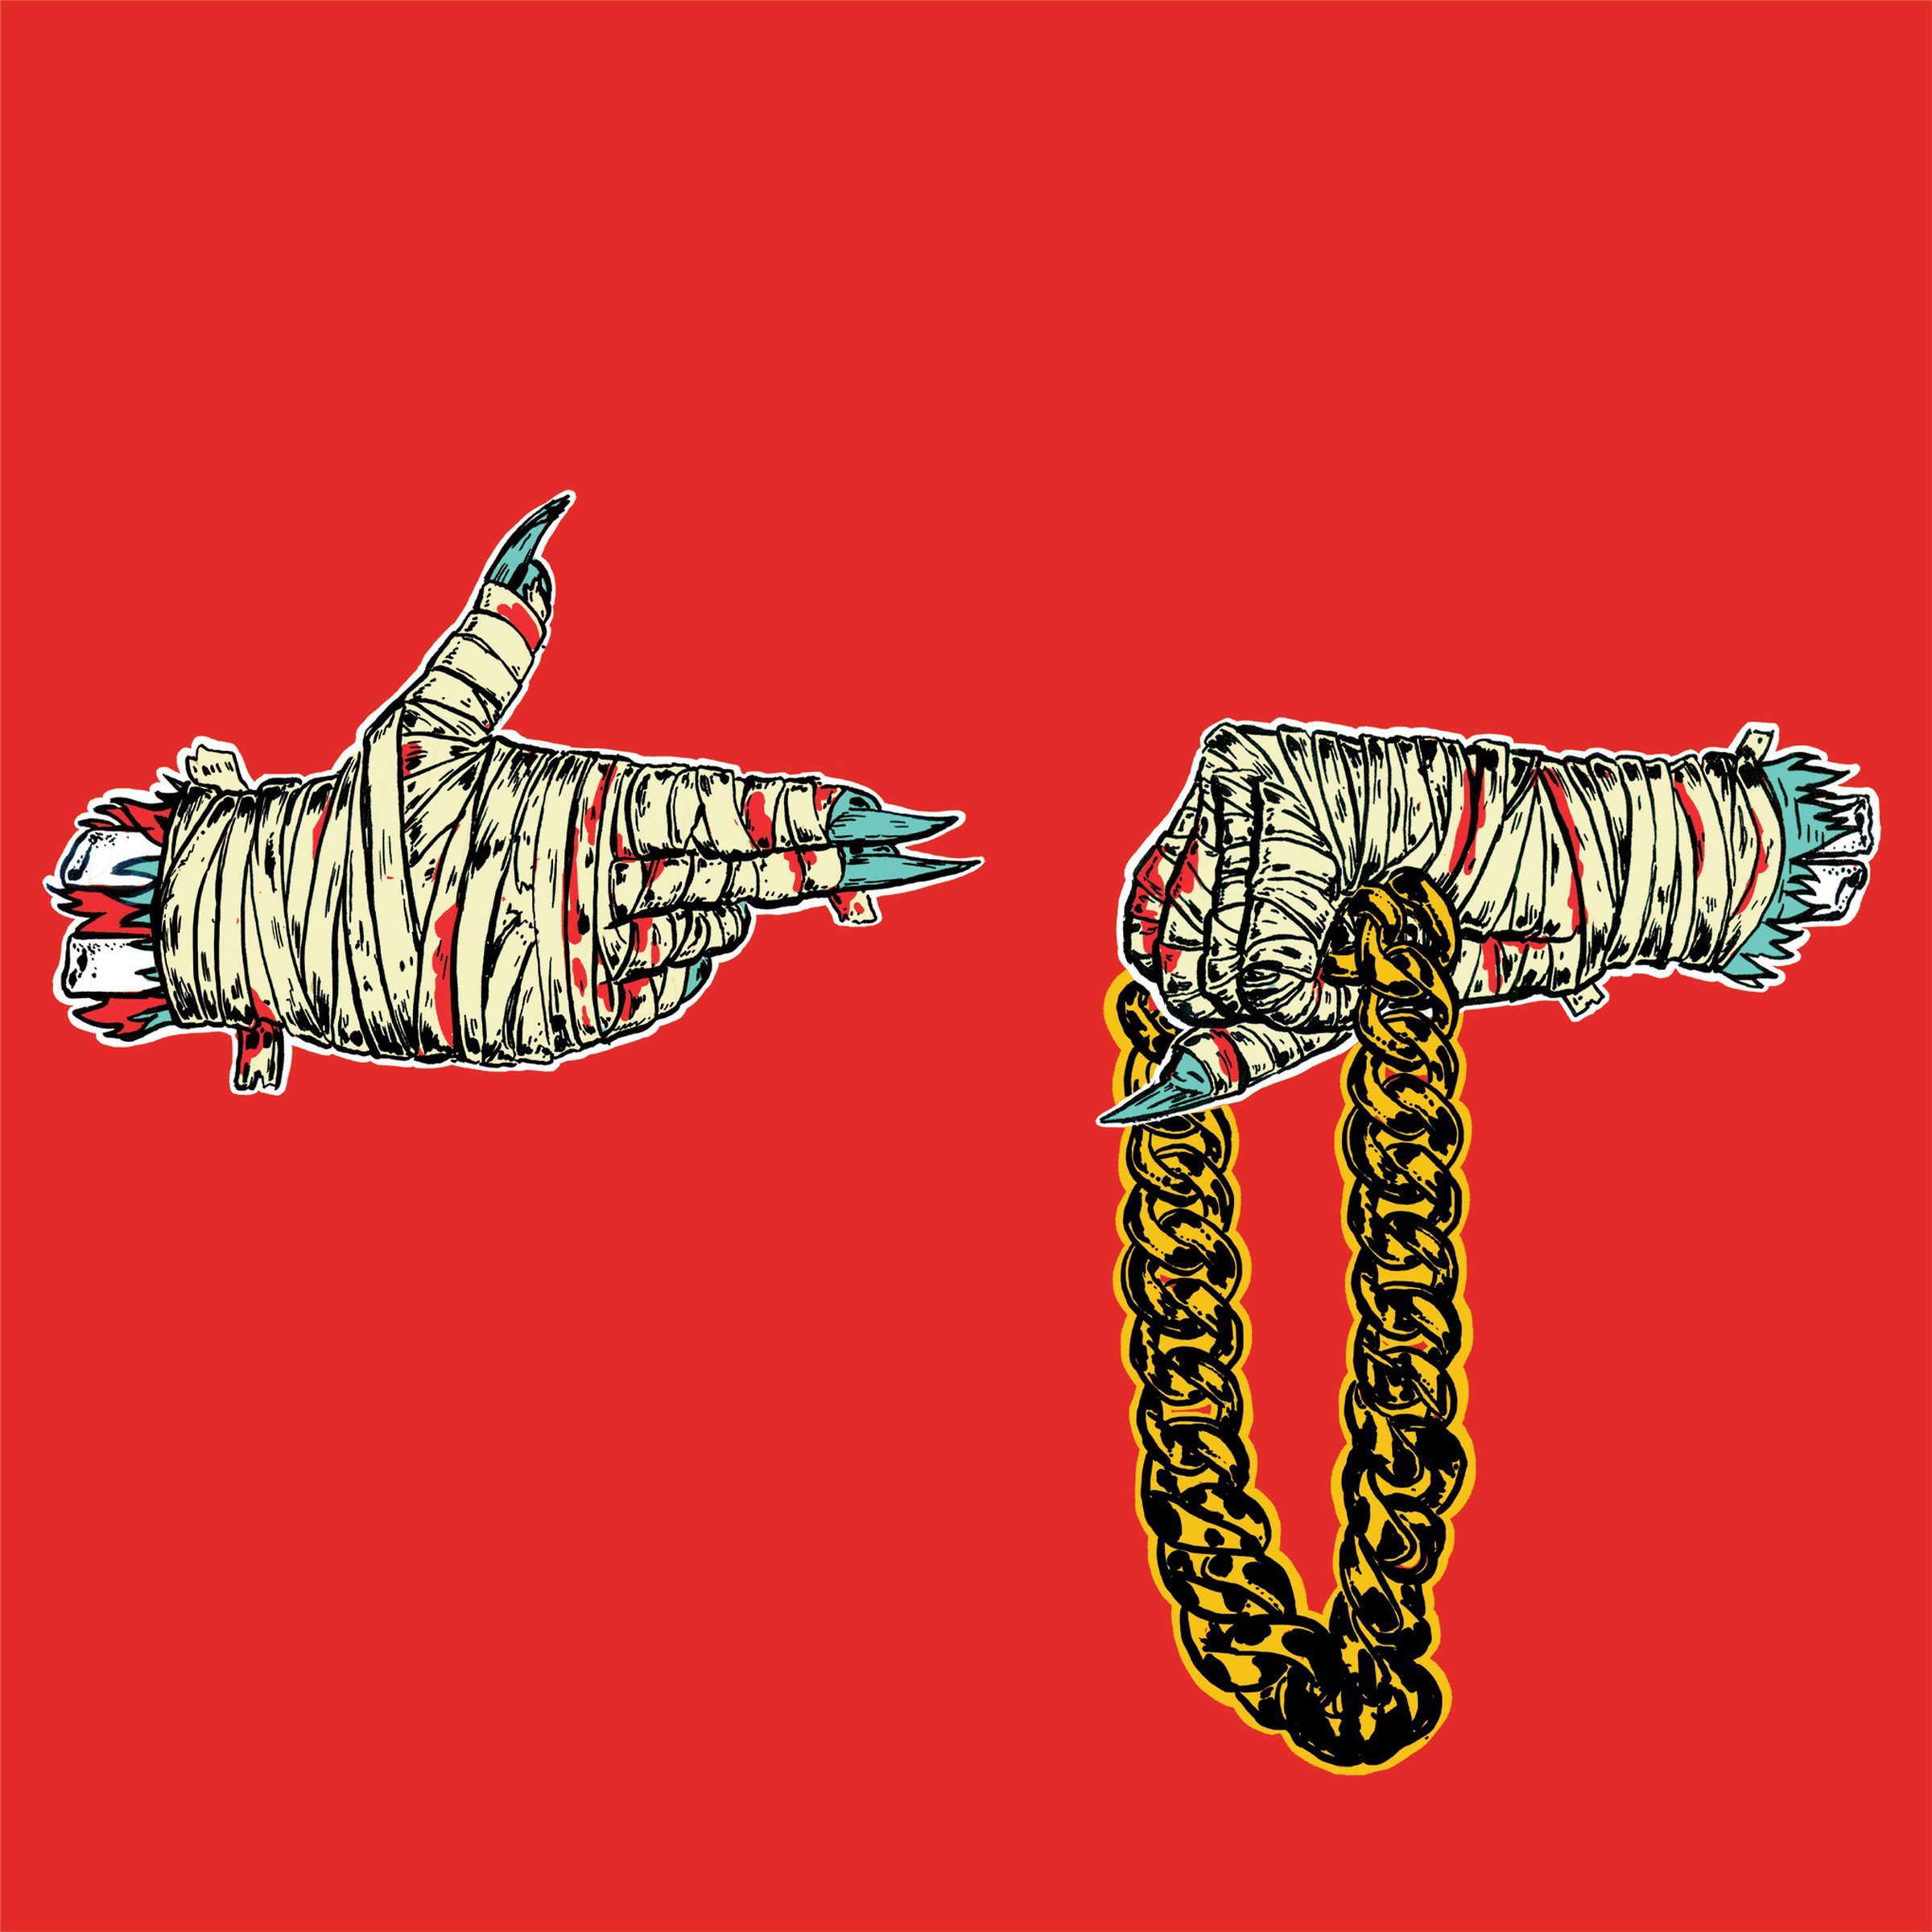 Cover artwork for Run The Jewels 2.